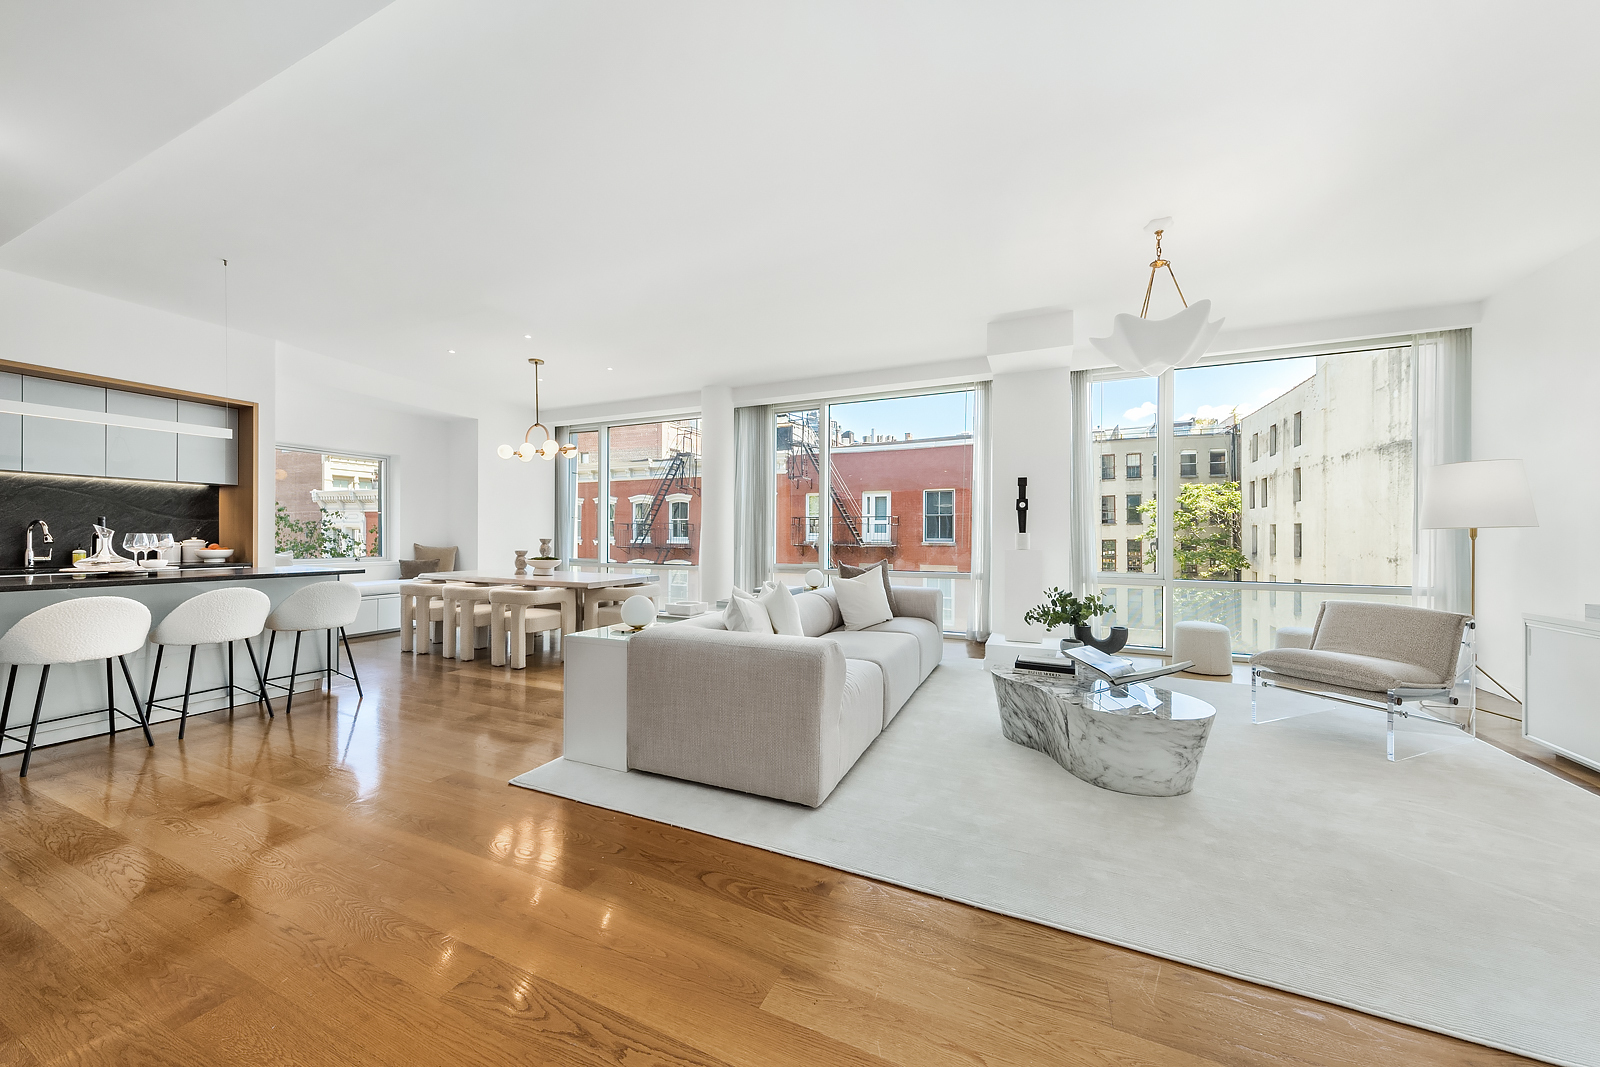 311 West Broadway 5Ej, Soho, Downtown, NYC - 5 Bedrooms  
4 Bathrooms  
7 Rooms - 